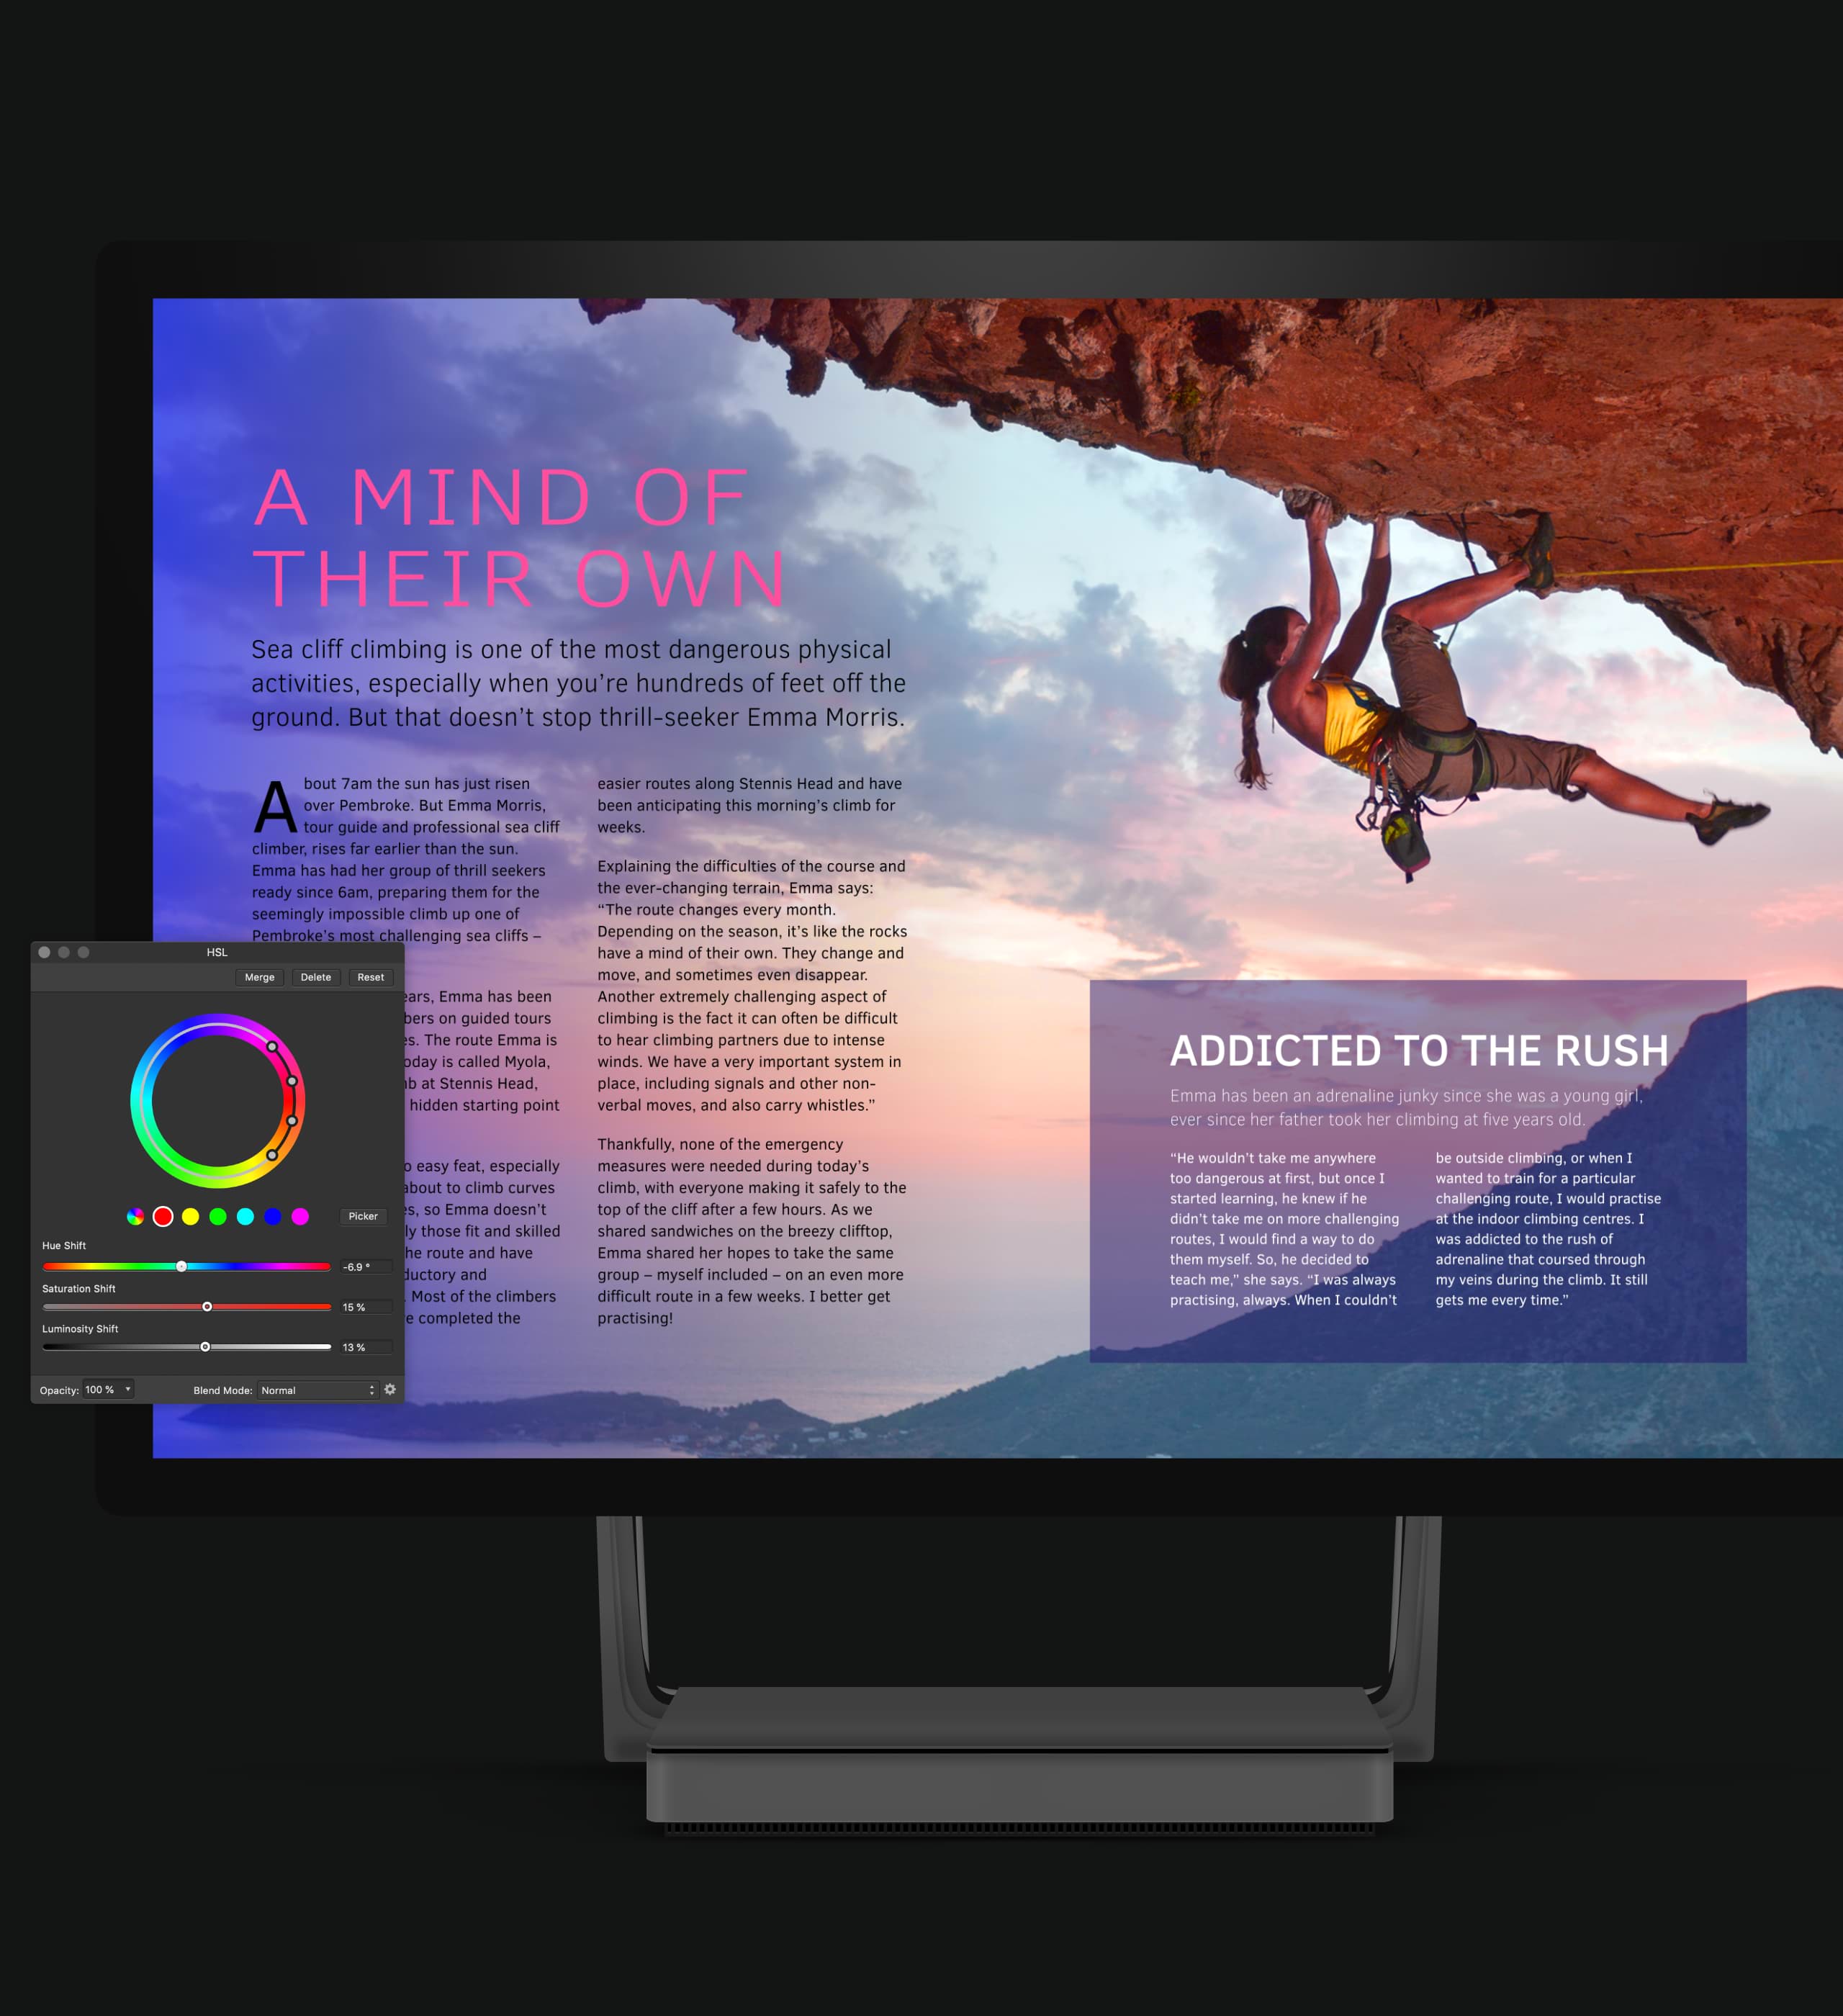 Surface Studio with a magazine article mockup on the screen. The article is titled “A Mind of Their Own” and features an image of a woman rock climbing. An Affinity Publisher color wheel is in the bottom left of the image.